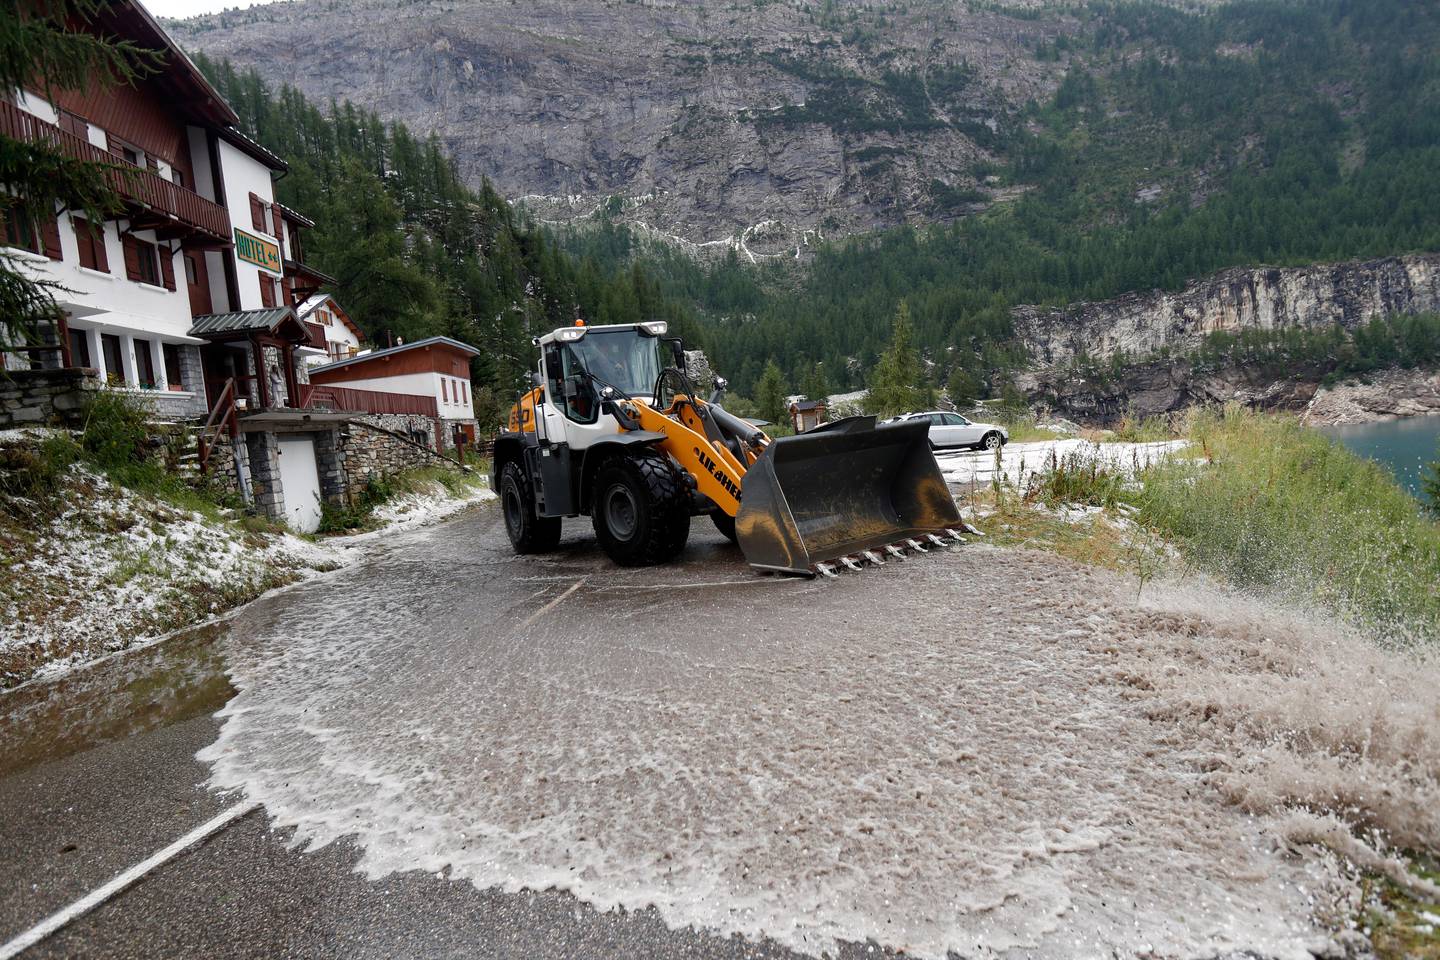 A worker uses a snow shovel to clean the road of the nineteenth stage of the Tour de France cycling race over 126,5 kilometers (78,60 miles) with start in Saint Jean De Maurienne and finish in Tignes, France, Friday, July 26, 2019. Tour de France organizers stopped Stage 19 of the race because of a hail storm as Julien Alaphilippe lost his yellow jersey to Egan Bernal. (AP Photo/Thibault Camus)